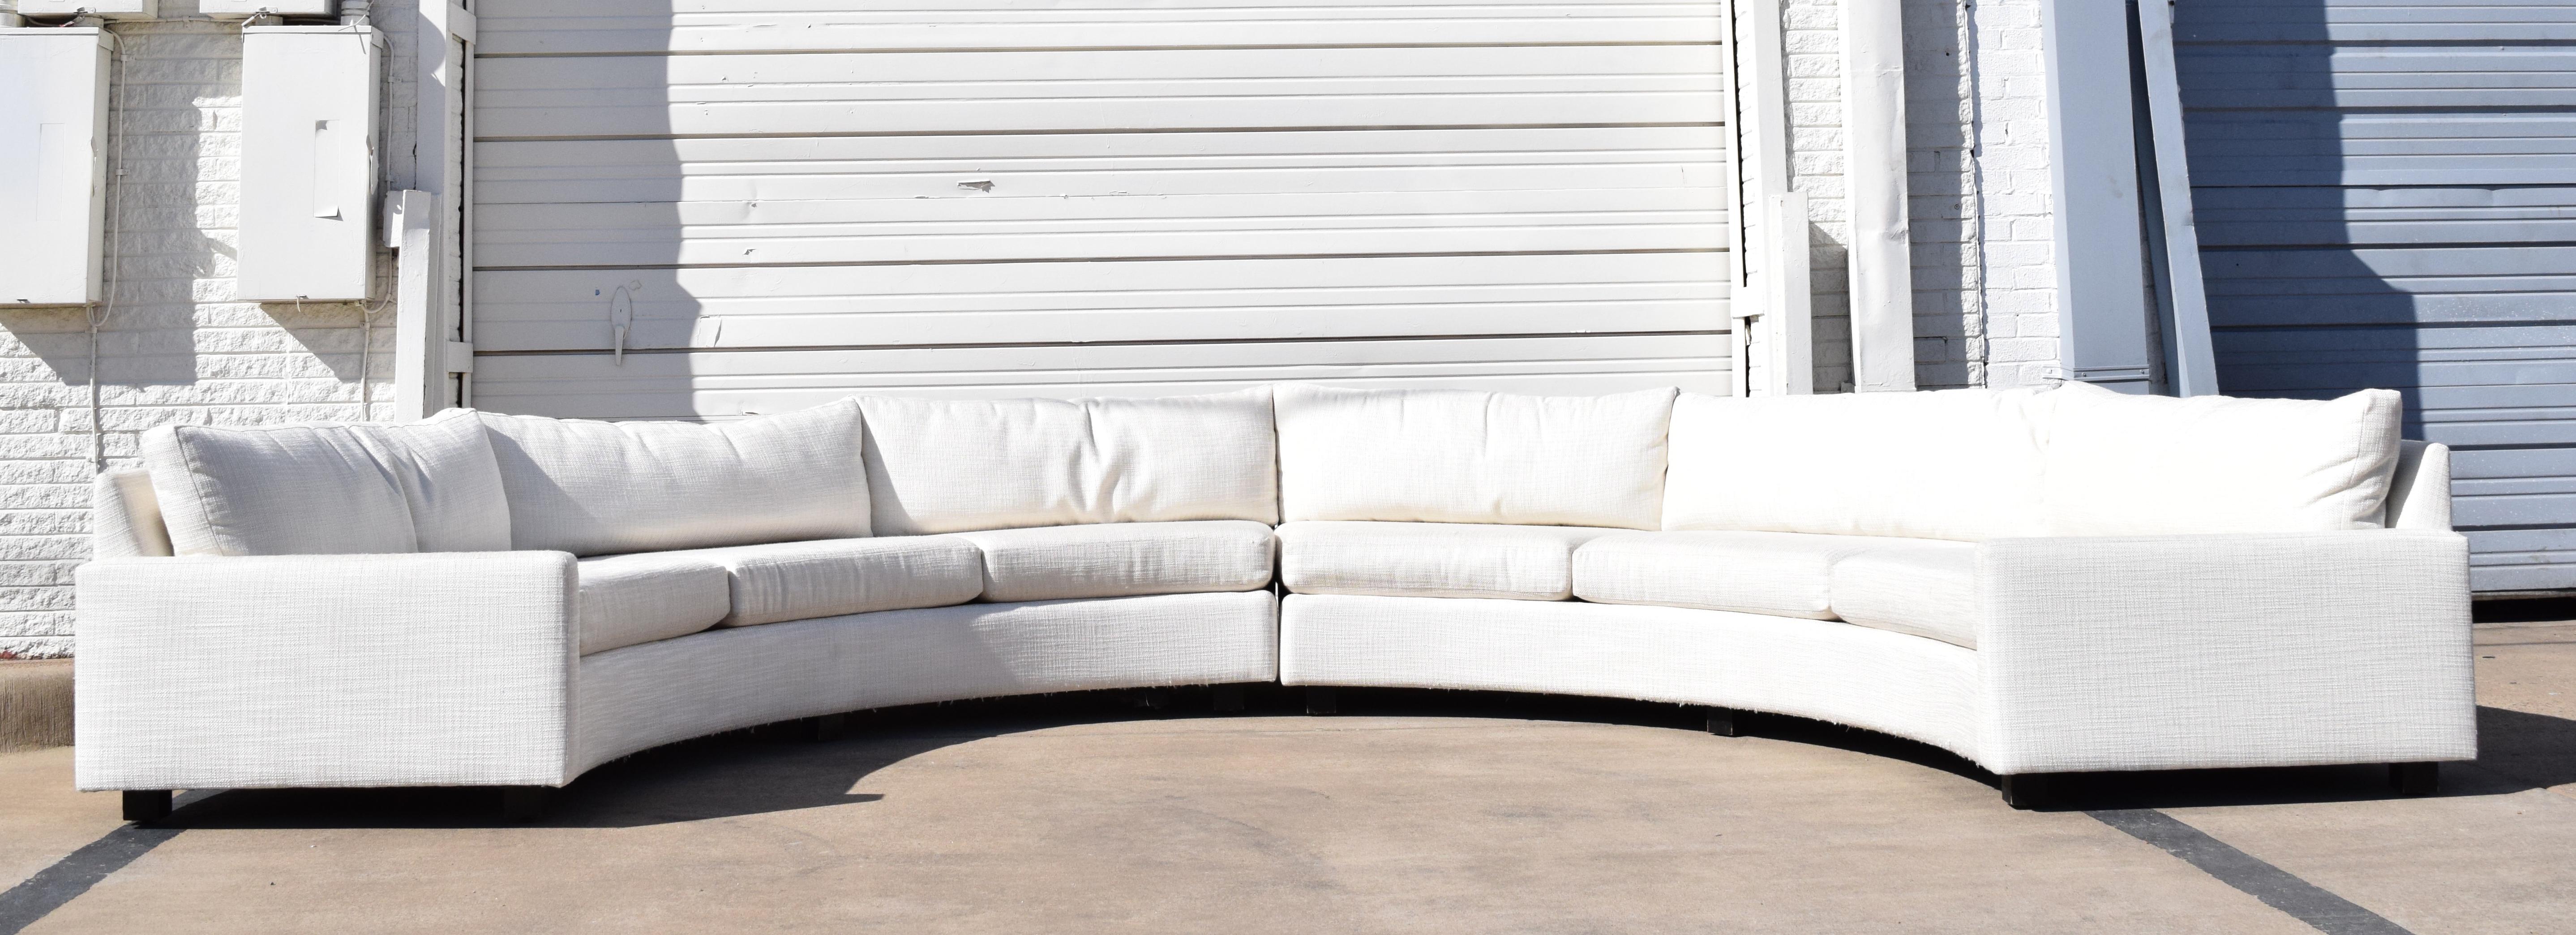 Milo Baughman Curved Sectional in White Woven Fabric 5